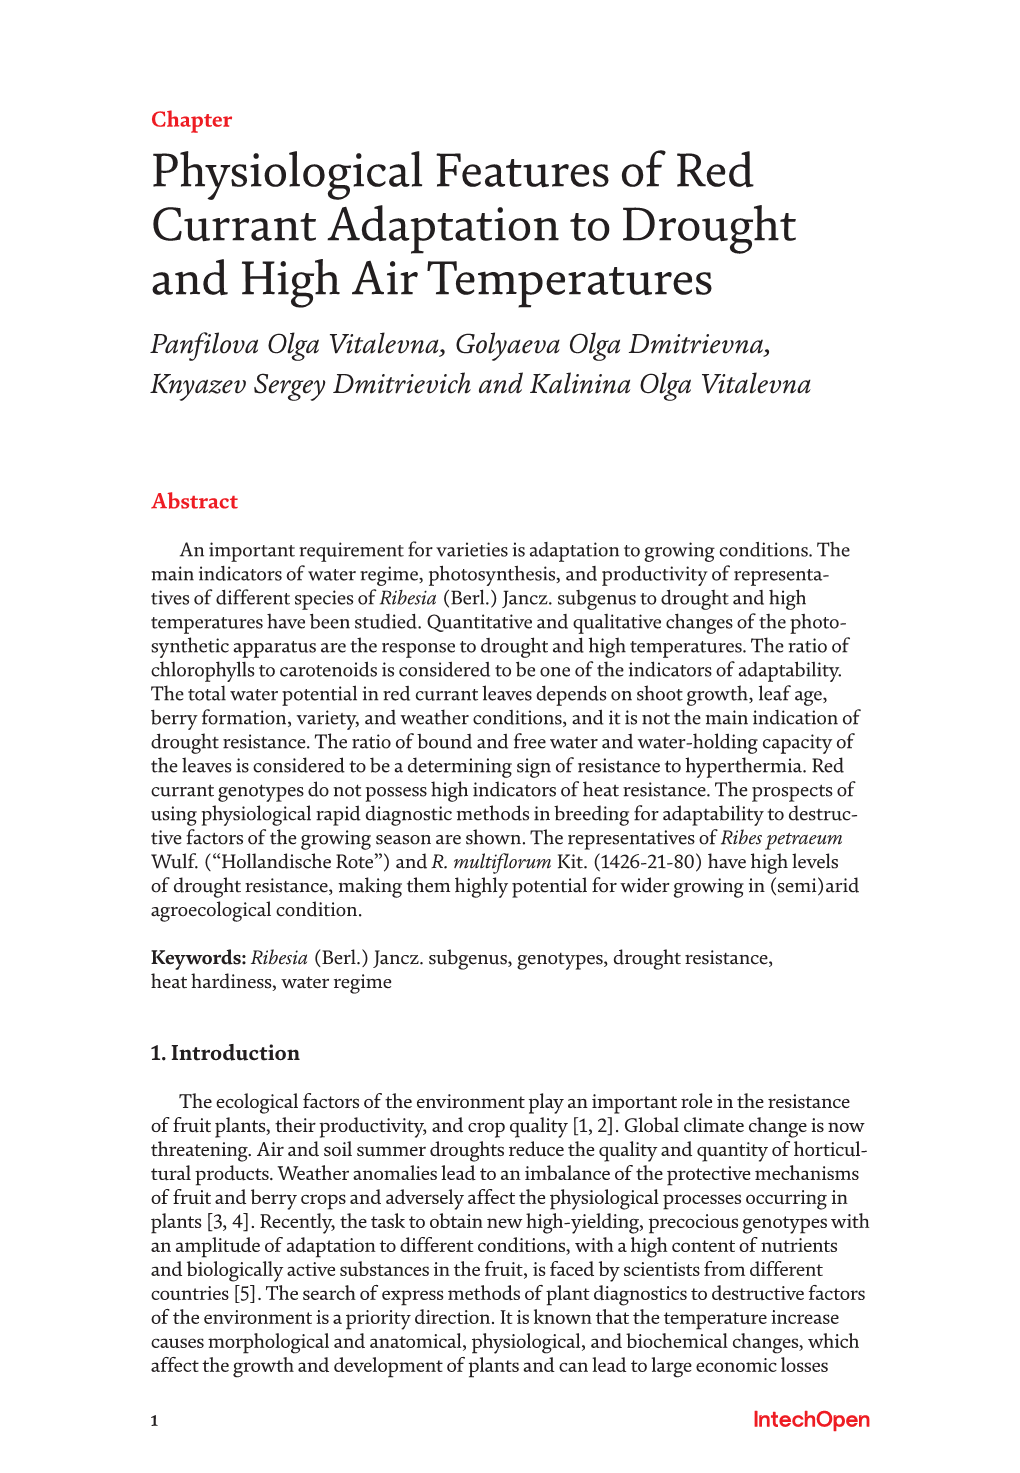 Physiological Features of Red Currant Adaptation to Drought and High Air